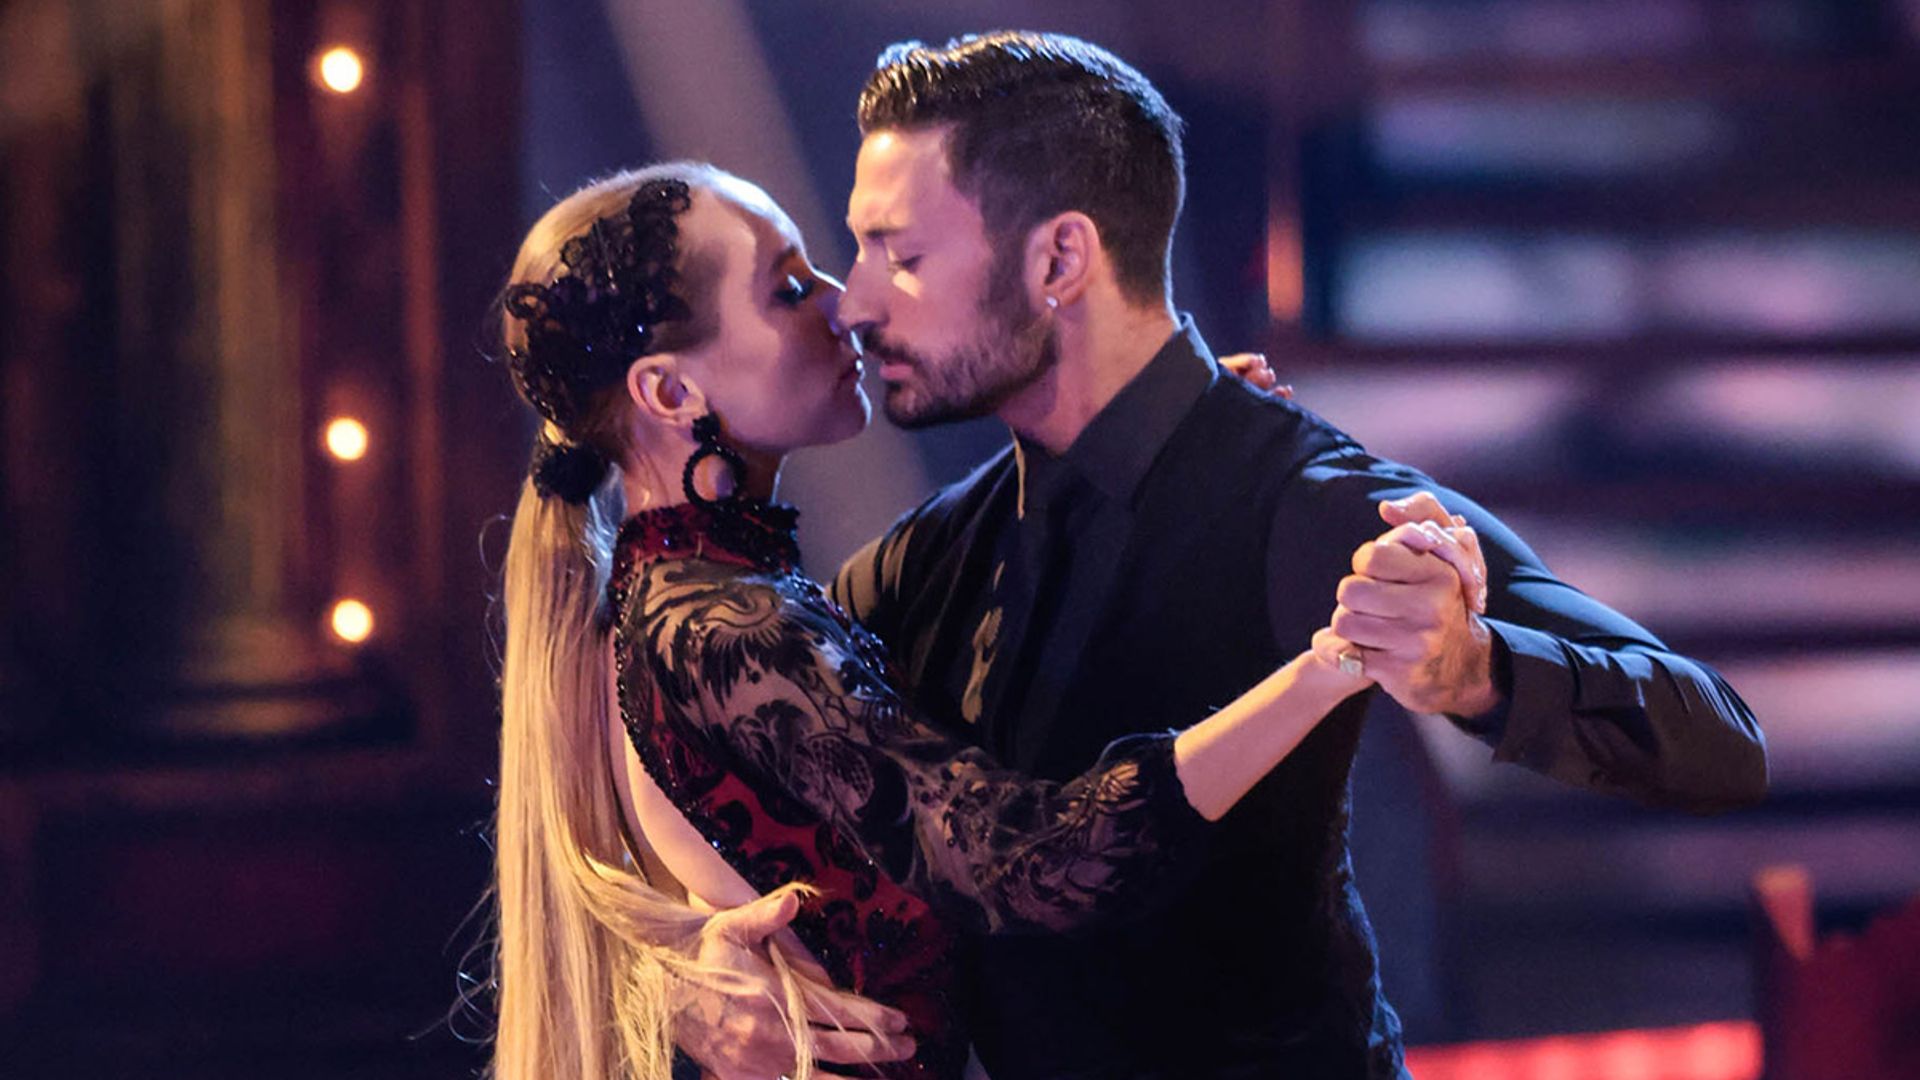 Strictly fans blown away by Rose Ayling-Ellis and Giovanni Pernice's intimate routine